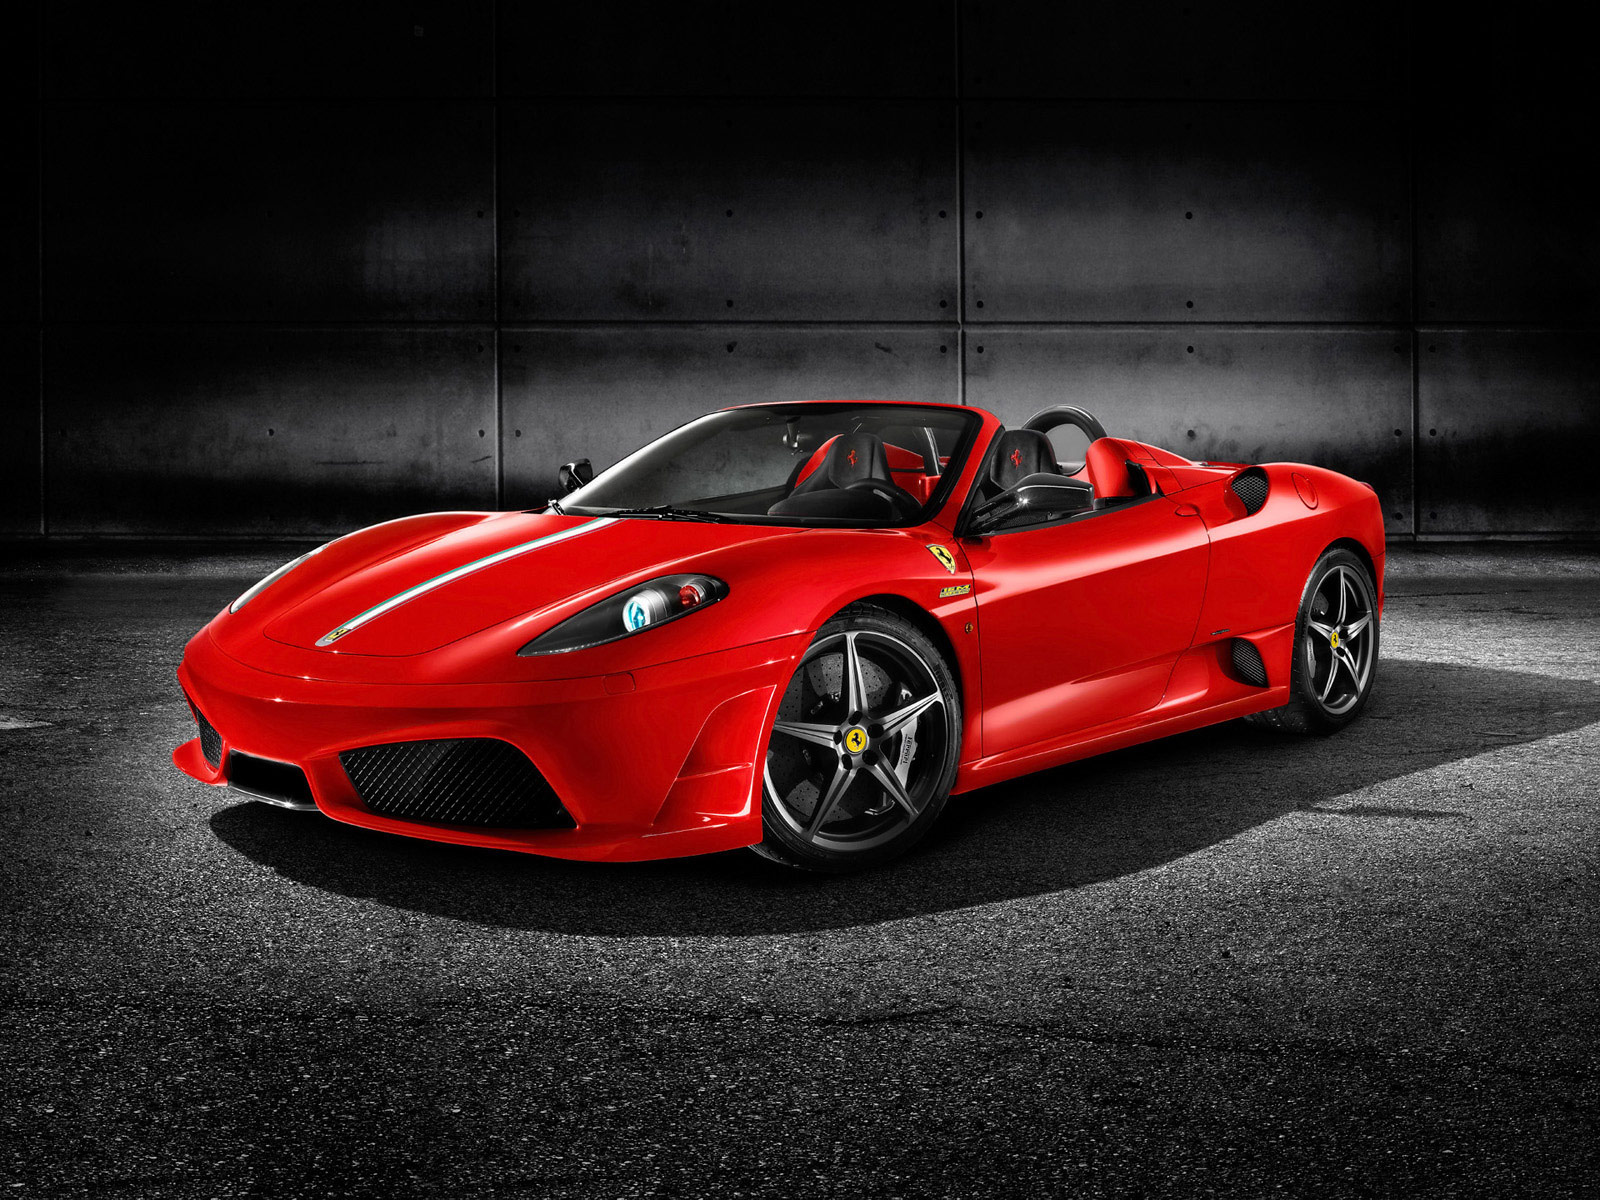 Ferrari car wallpapers. Car review, features, specifications